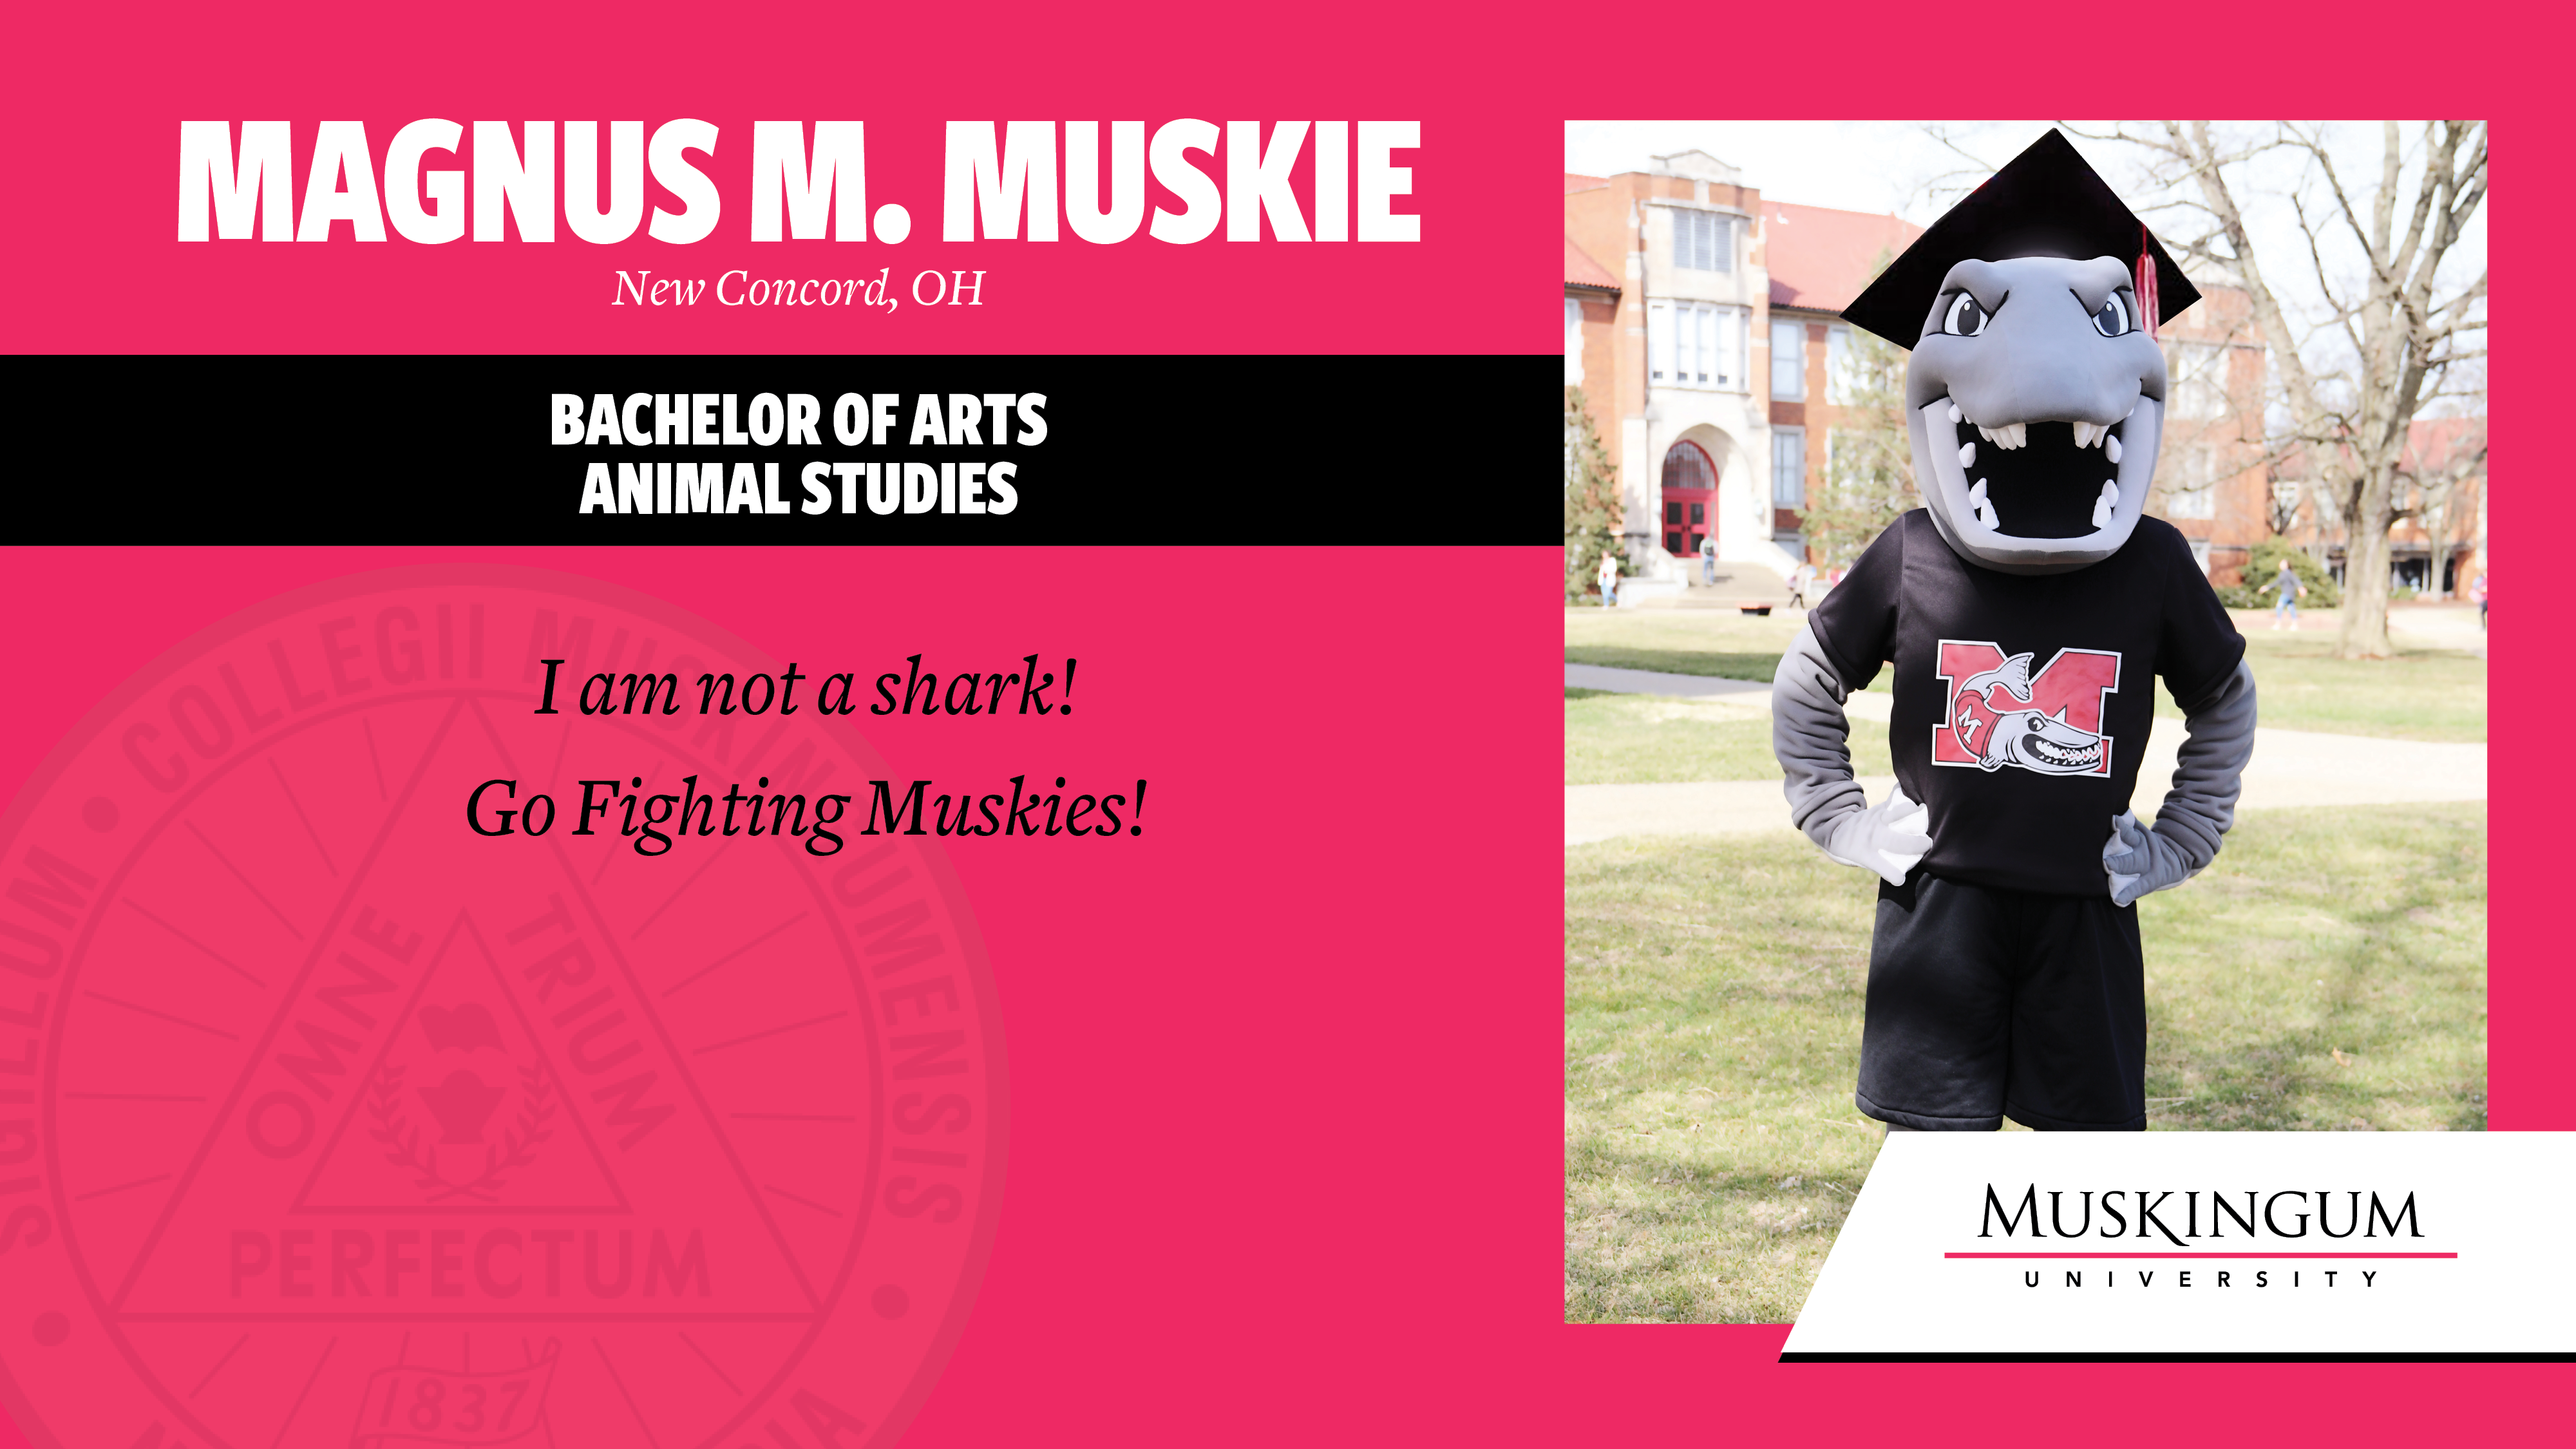 example slide featuring magnus the muskie